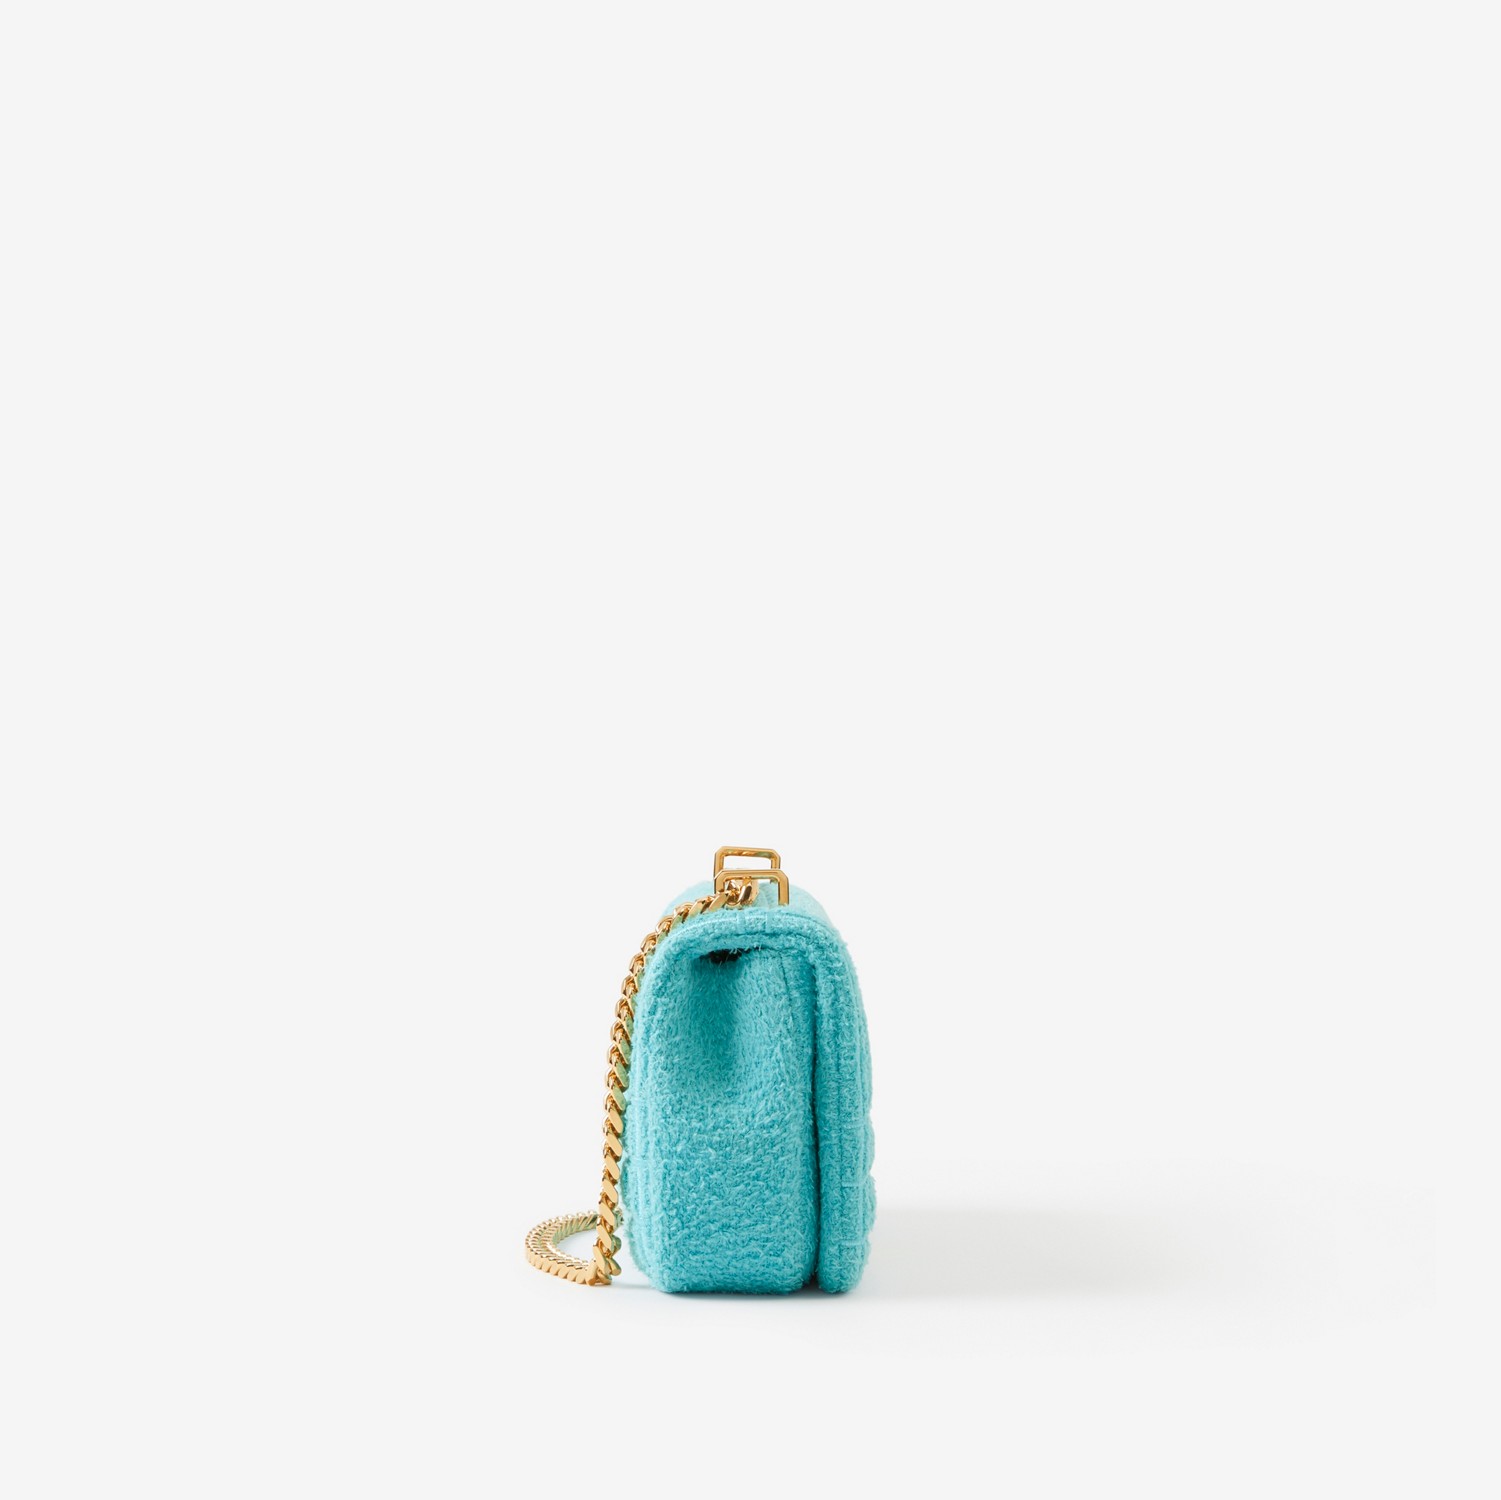 Small Lola Bag in Vivid Turquoise - Women | Burberry® Official